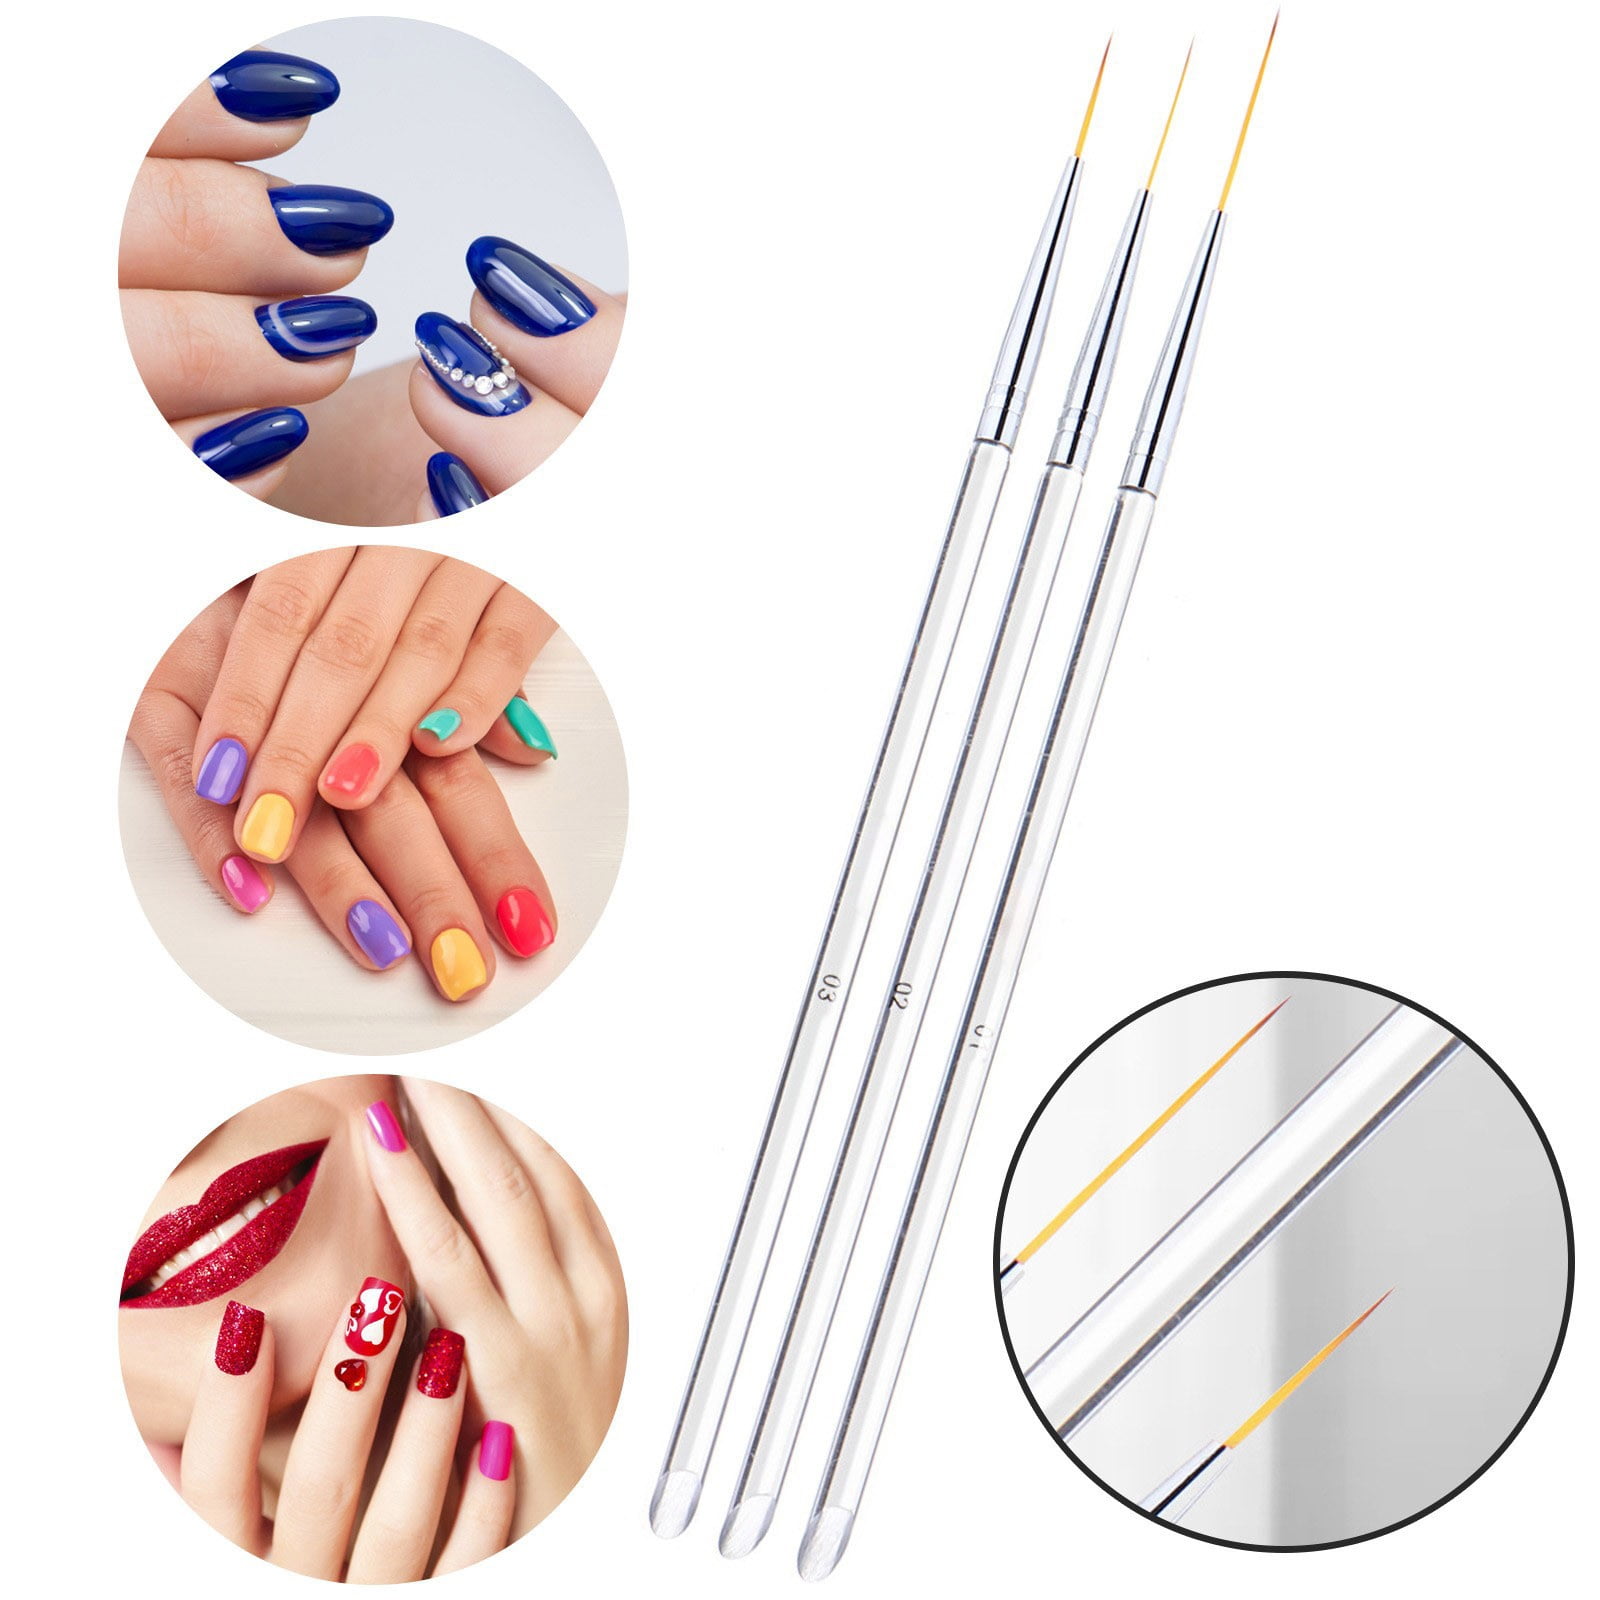 Nail tip is painted with white pencil … – License image – 10188216 ❘ Image  Professionals